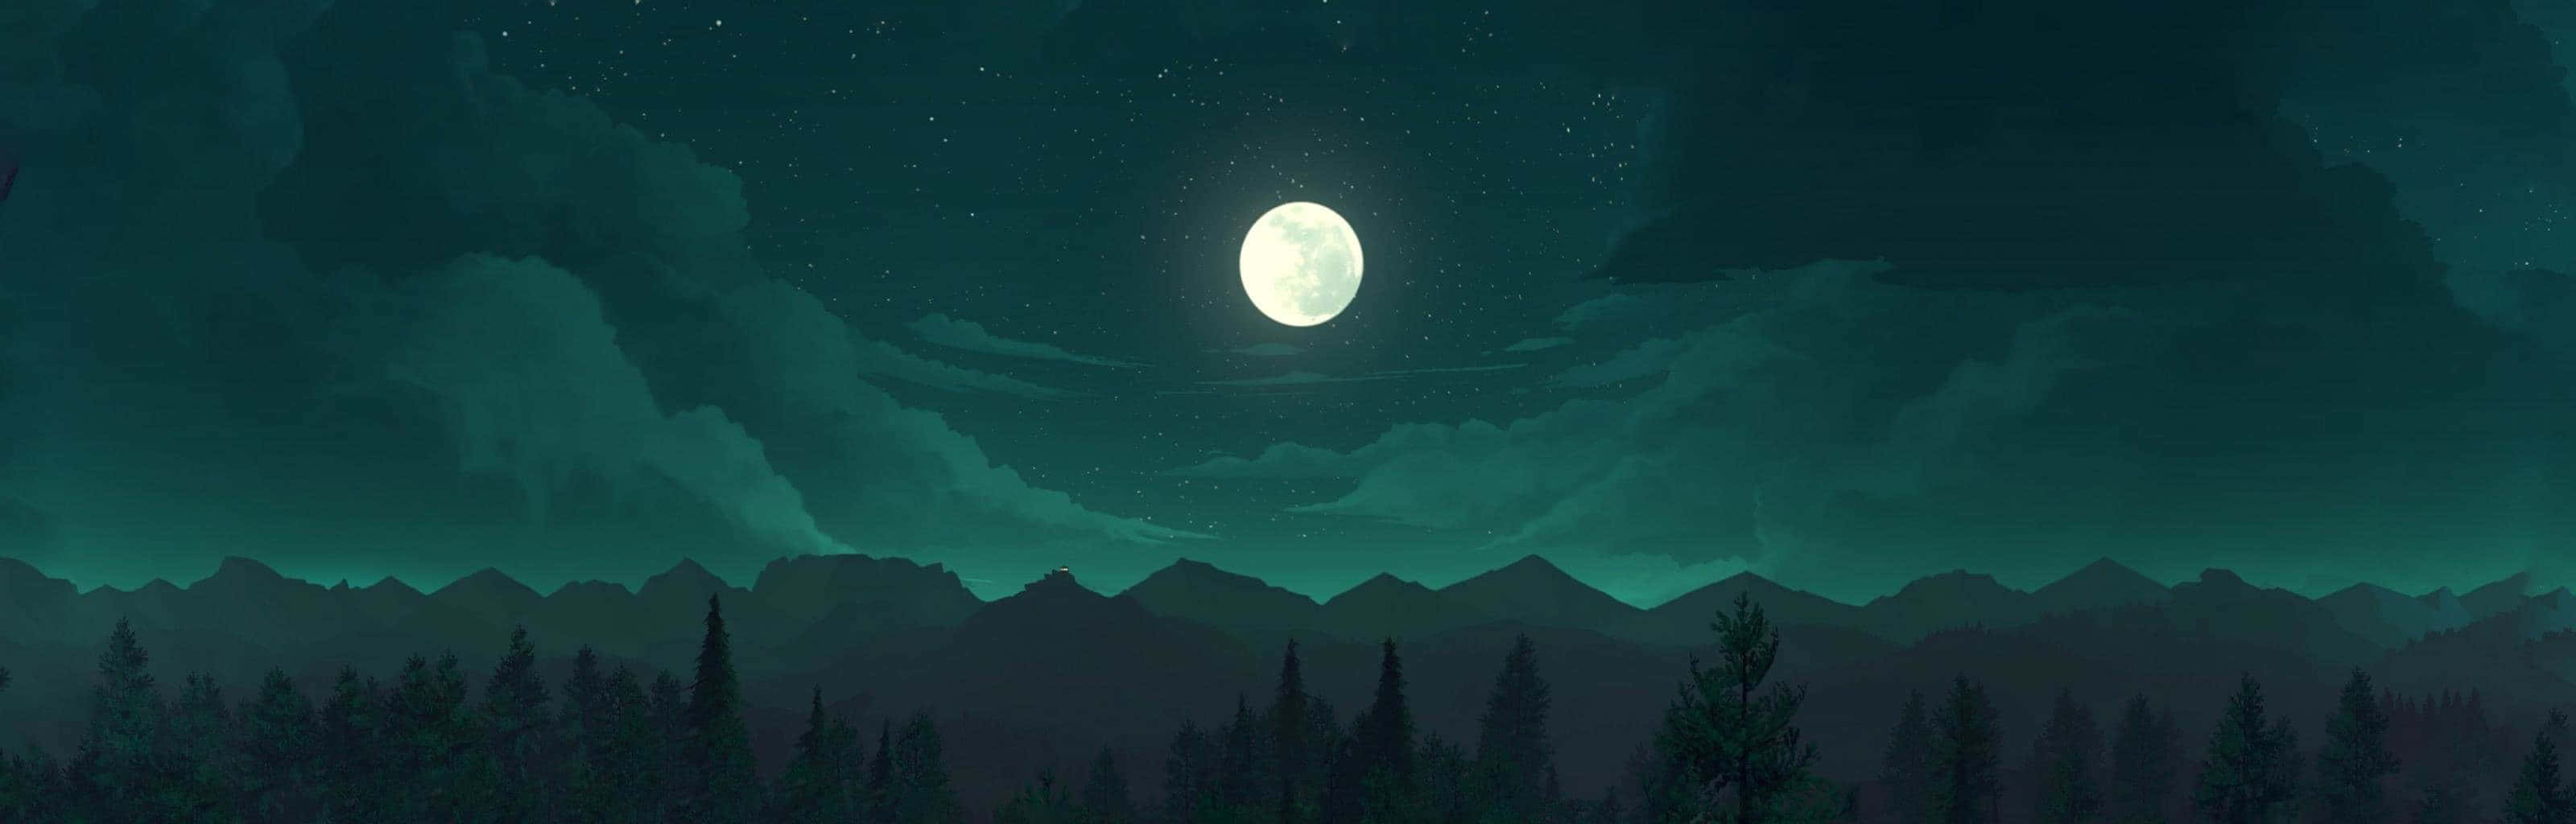 Full Moon With Green Sky Cool Dual Monitor Wallpaper